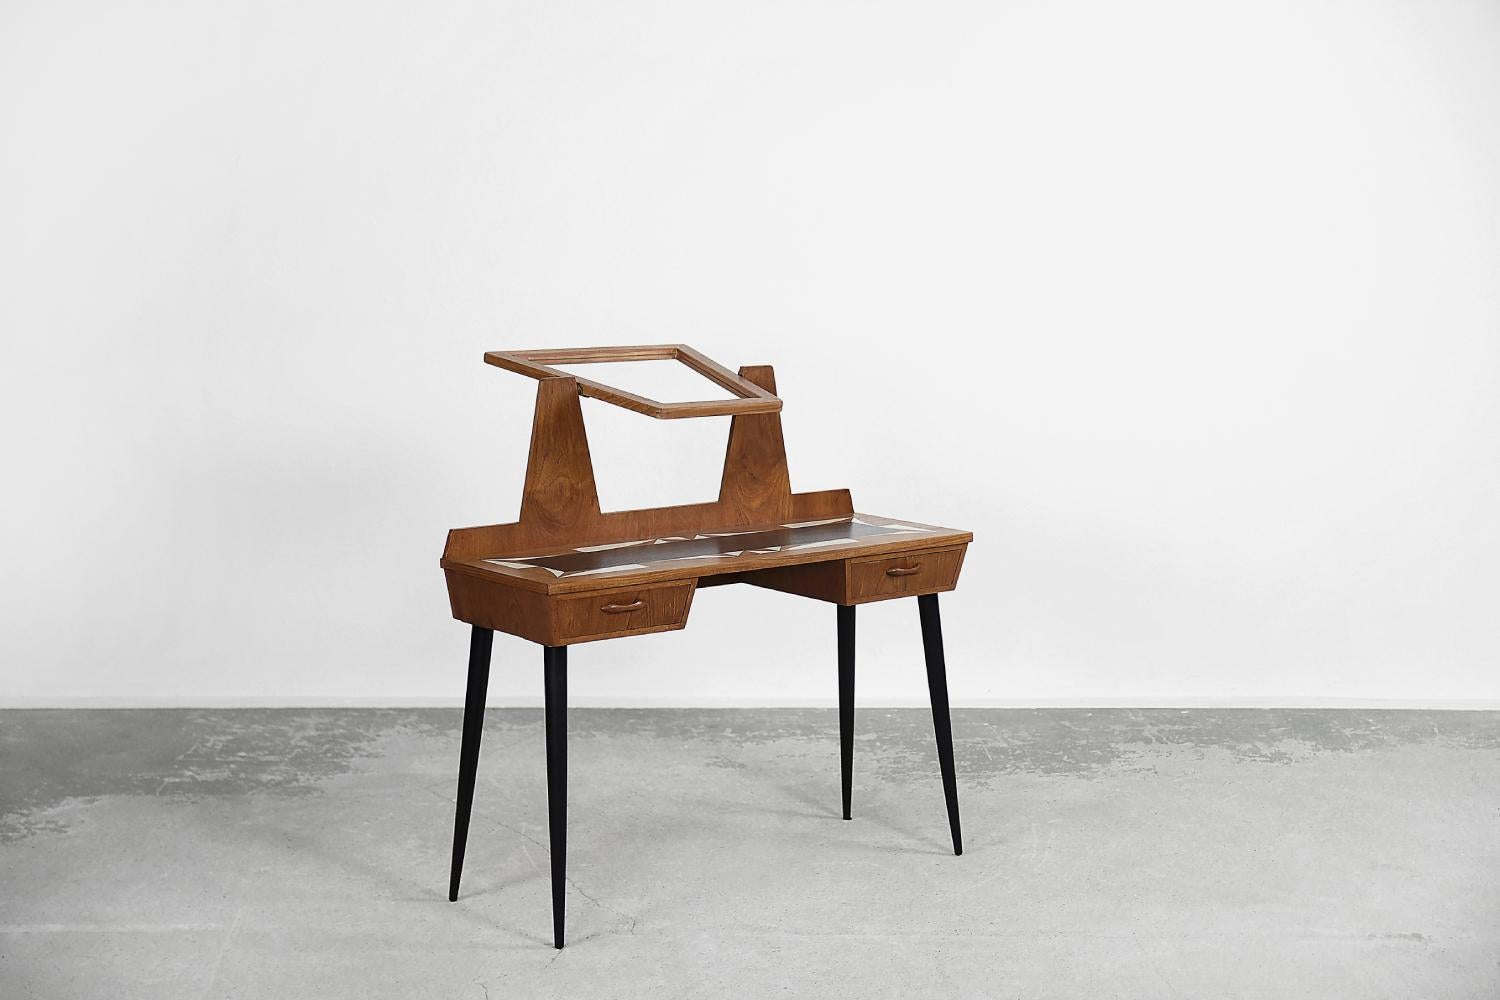 The modernist dressing table with a mirror was made in Scandinavia during the 1960s. It is finished with teak wood in a warm shade of brown. It has two drawers. A mirror is in a geometric frame, the angle of which can be freely adjusted. The